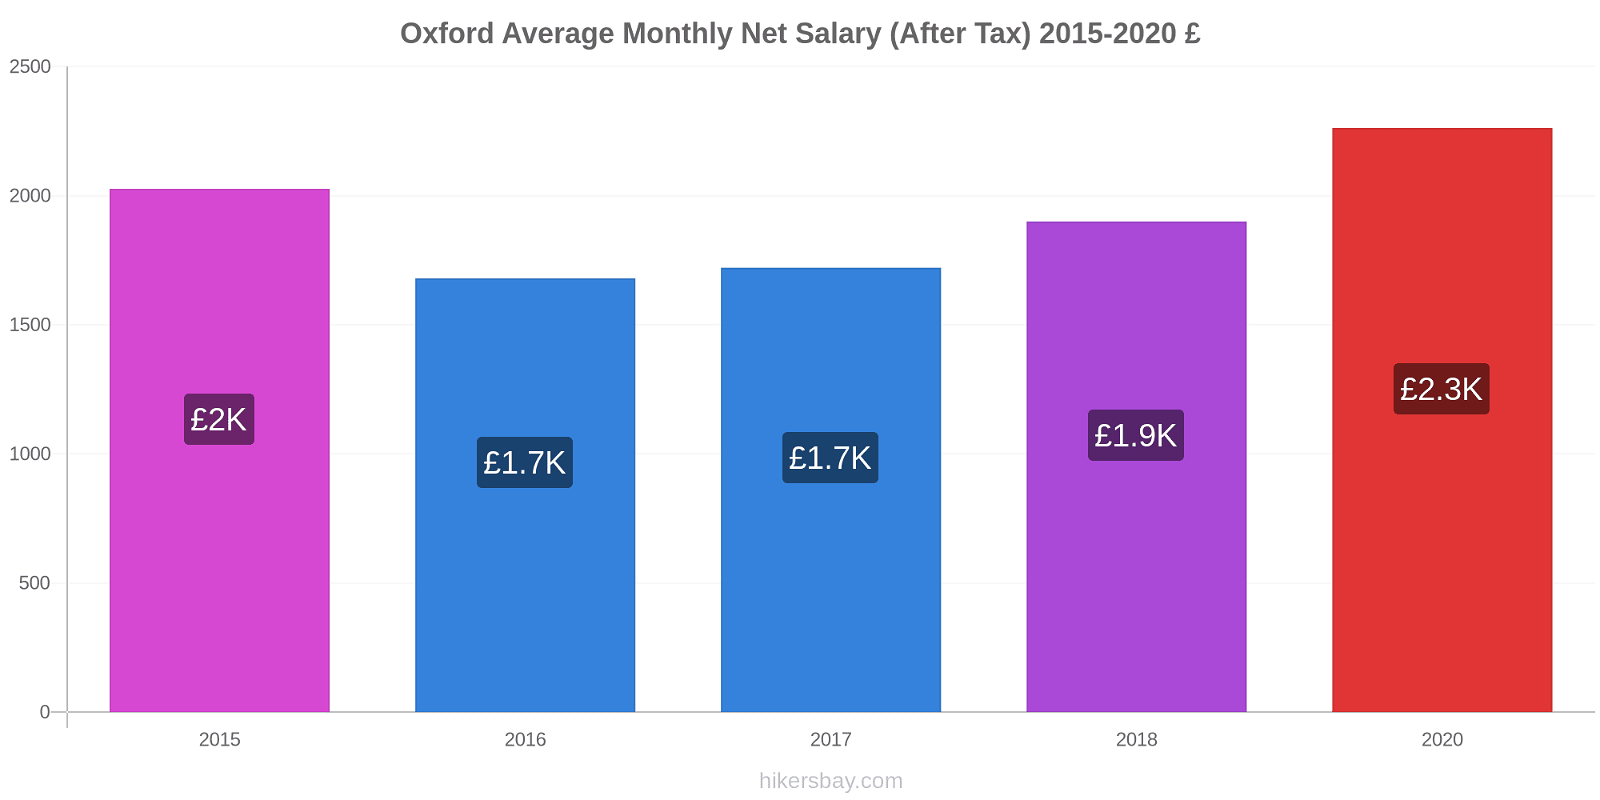 Oxford price changes Average Monthly Net Salary (After Tax) hikersbay.com